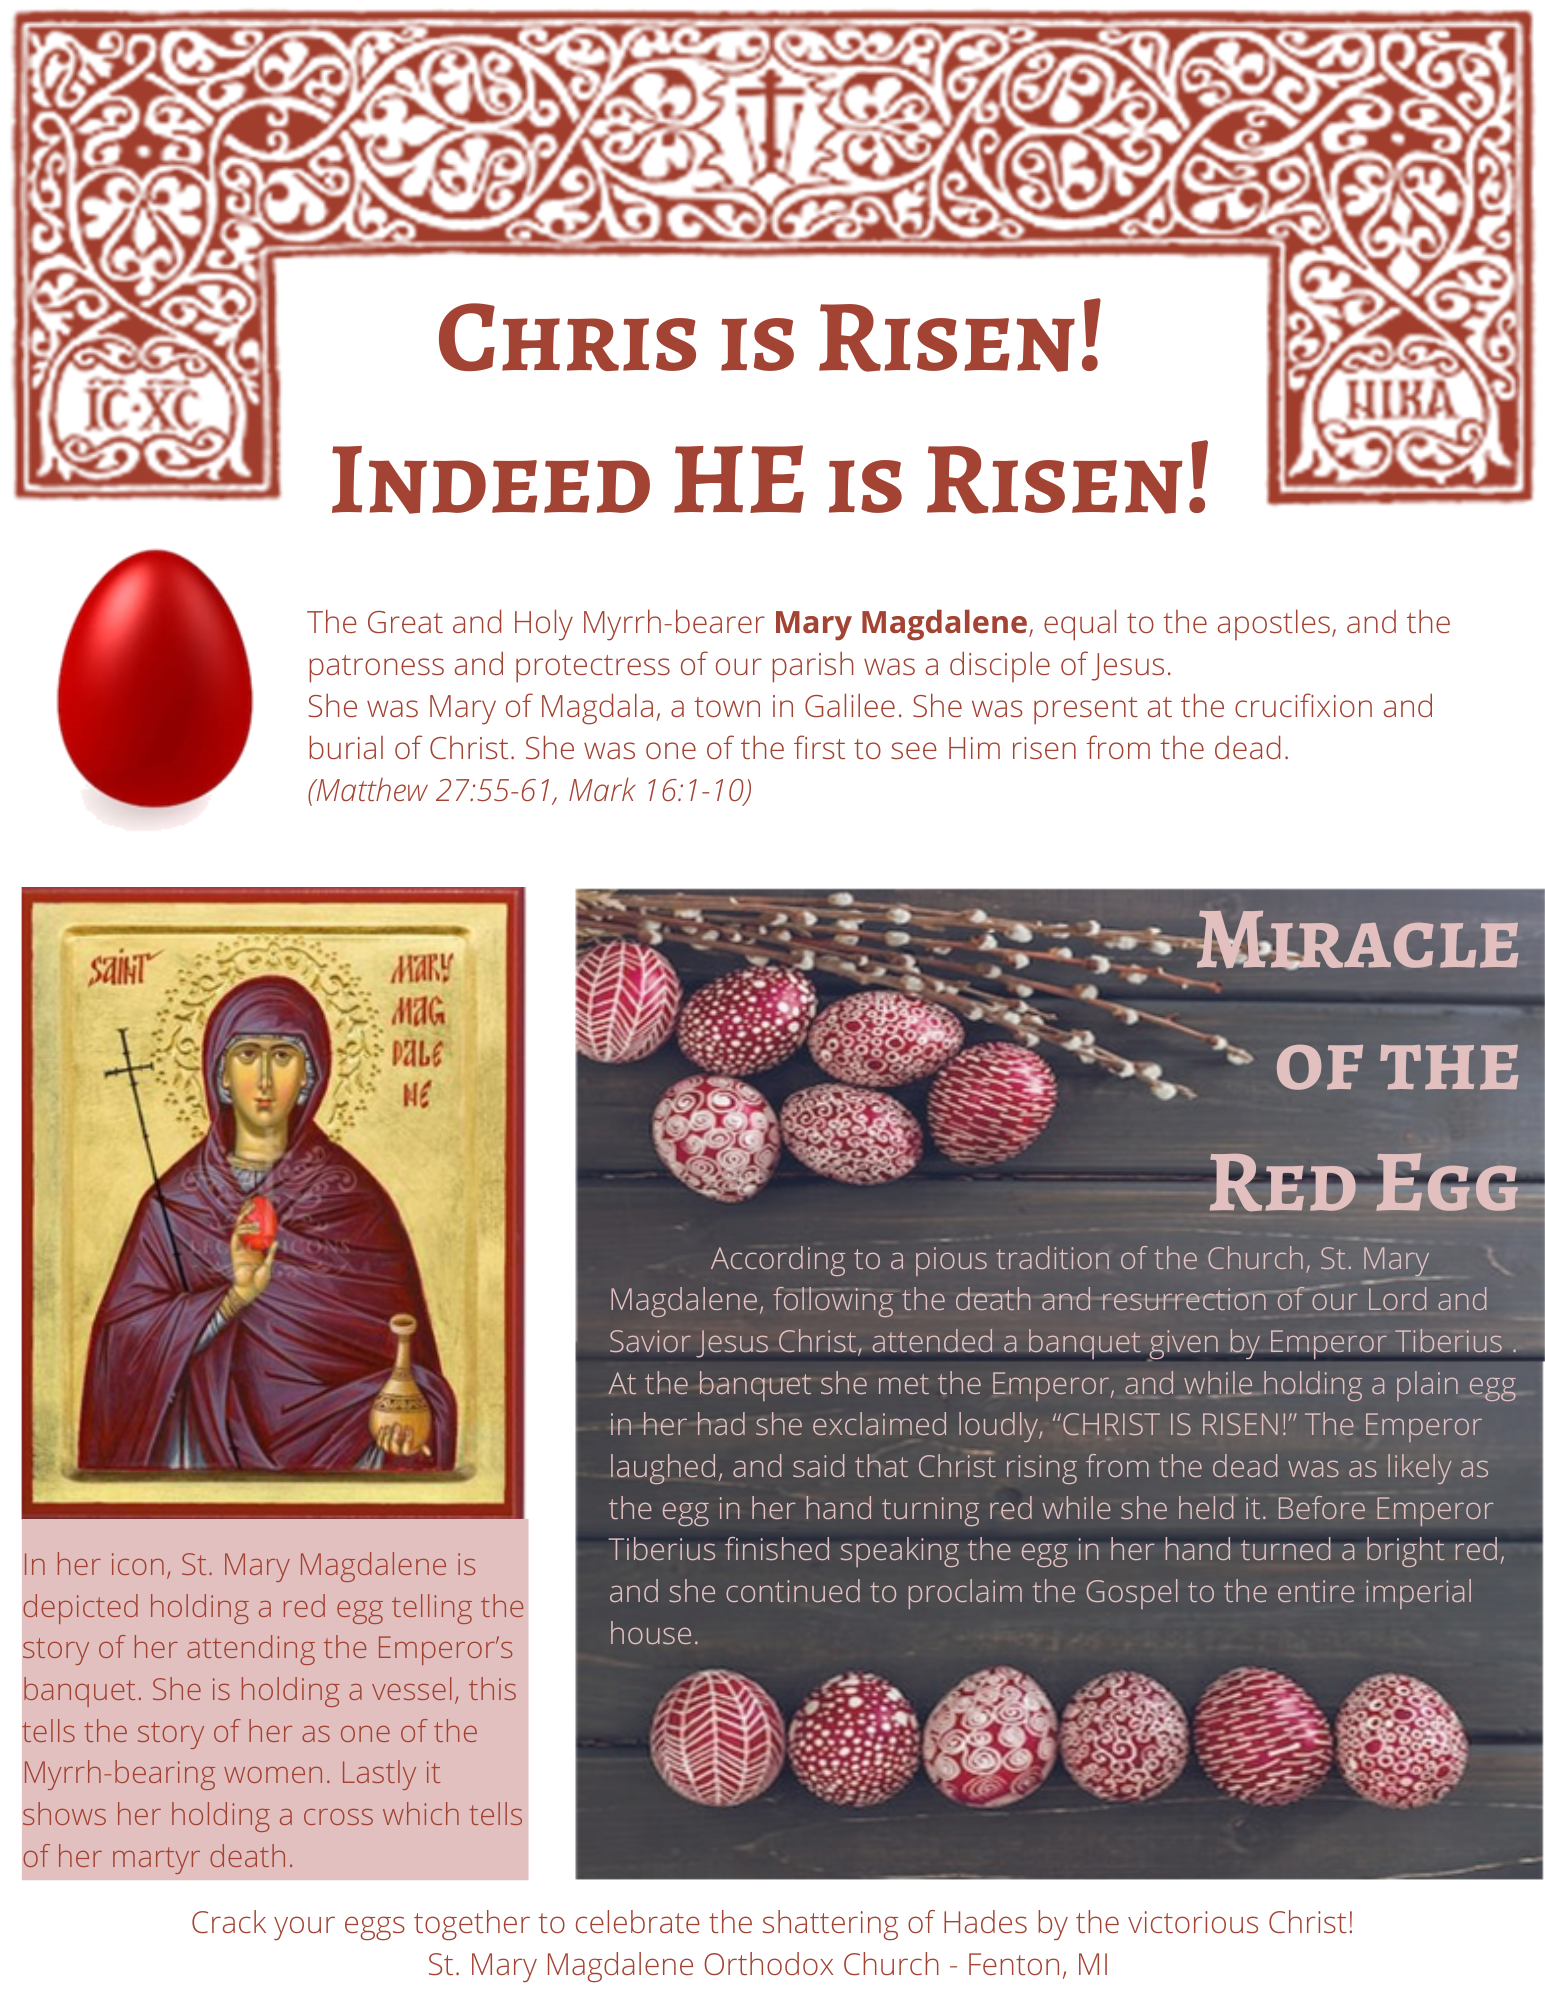 Miracle of the Red Egg (1).png